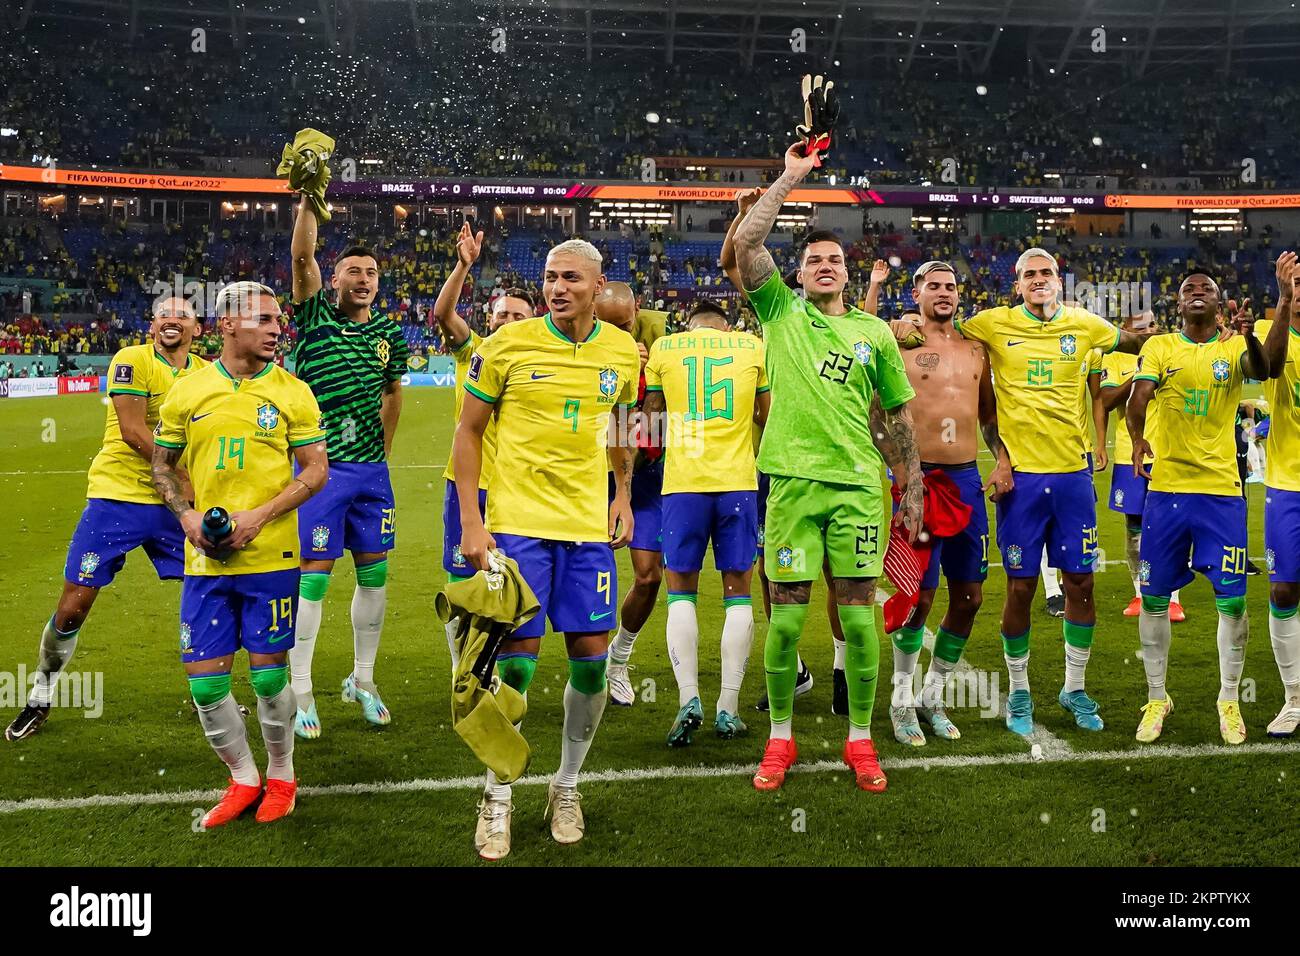 DOHA, QATAR - NOVEMBER 28: Players of Brazil celebrate the victory after the FIFA World Cup Qatar 2022 group G match between Brazil and Switzerland at Stadium 974 on November 28, 2022 in Doha, Qatar. (Photo by Florencia Tan Jun/PxImages) Stock Photo